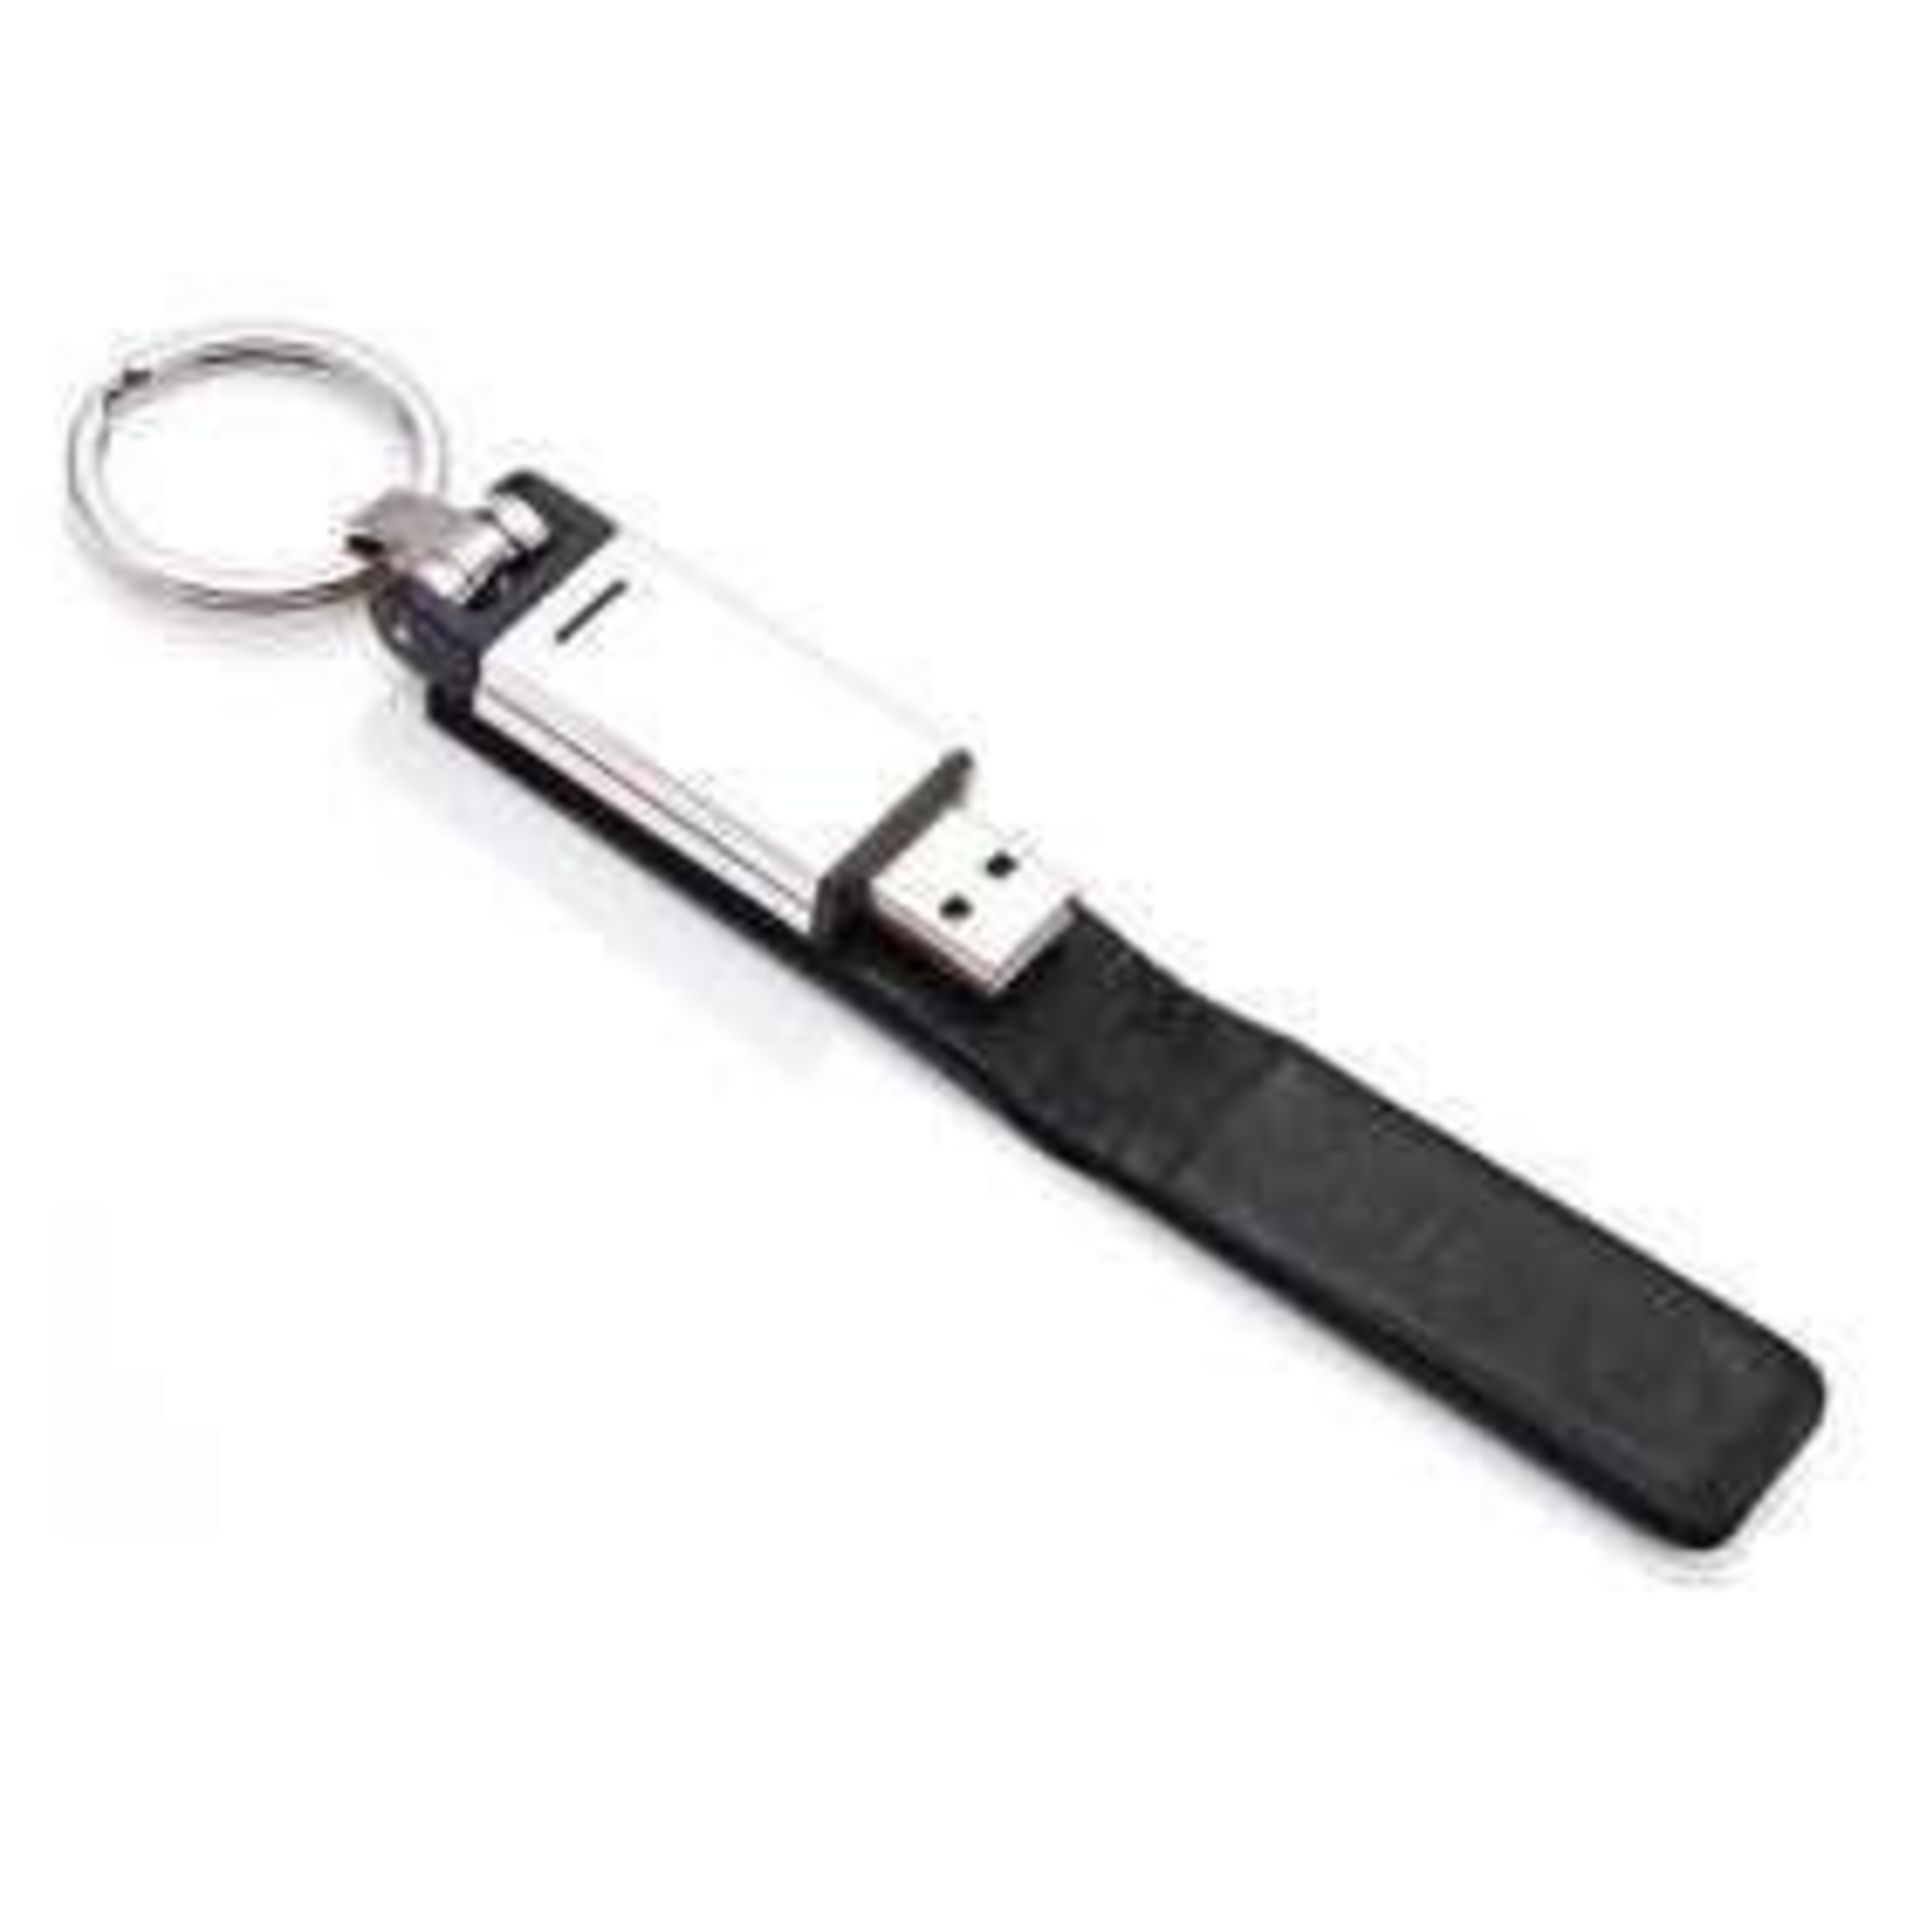 1 x ICE London Silver Plated 2GB USB Flashdrive Keyring - Features A Genuine Leather Wrap With Magne - Image 2 of 6